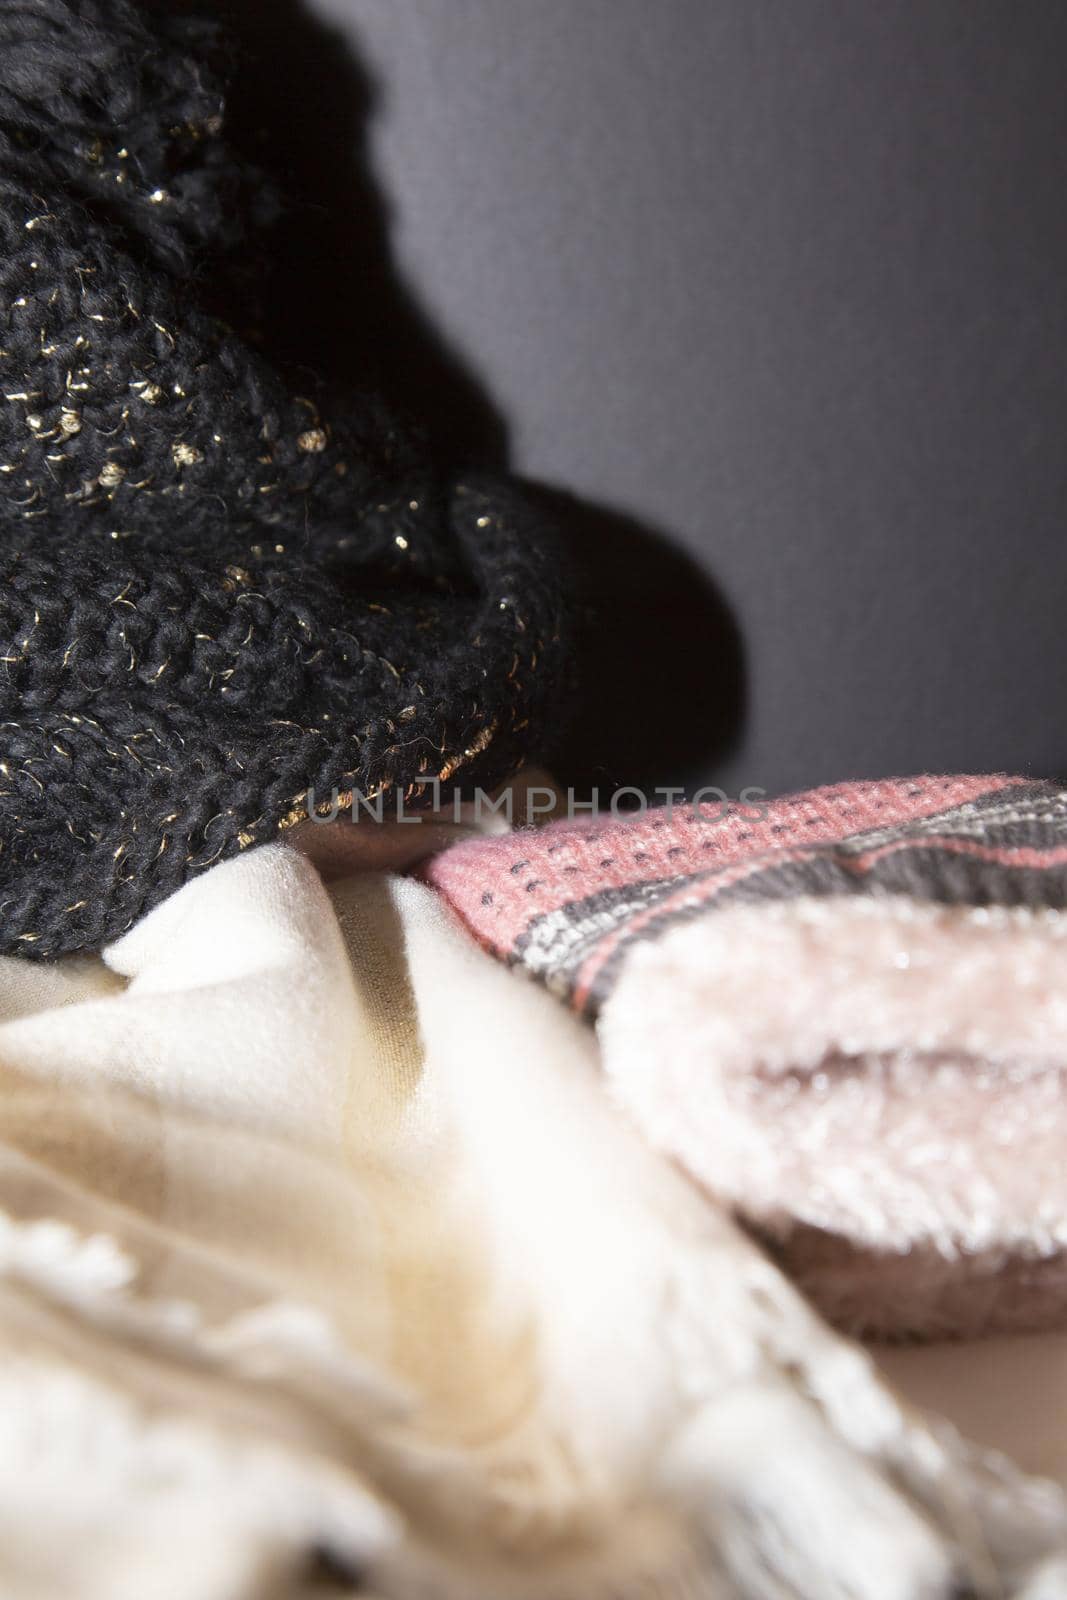 White and gold scarf, black and gold winter hat, and pink and grey winter gloves